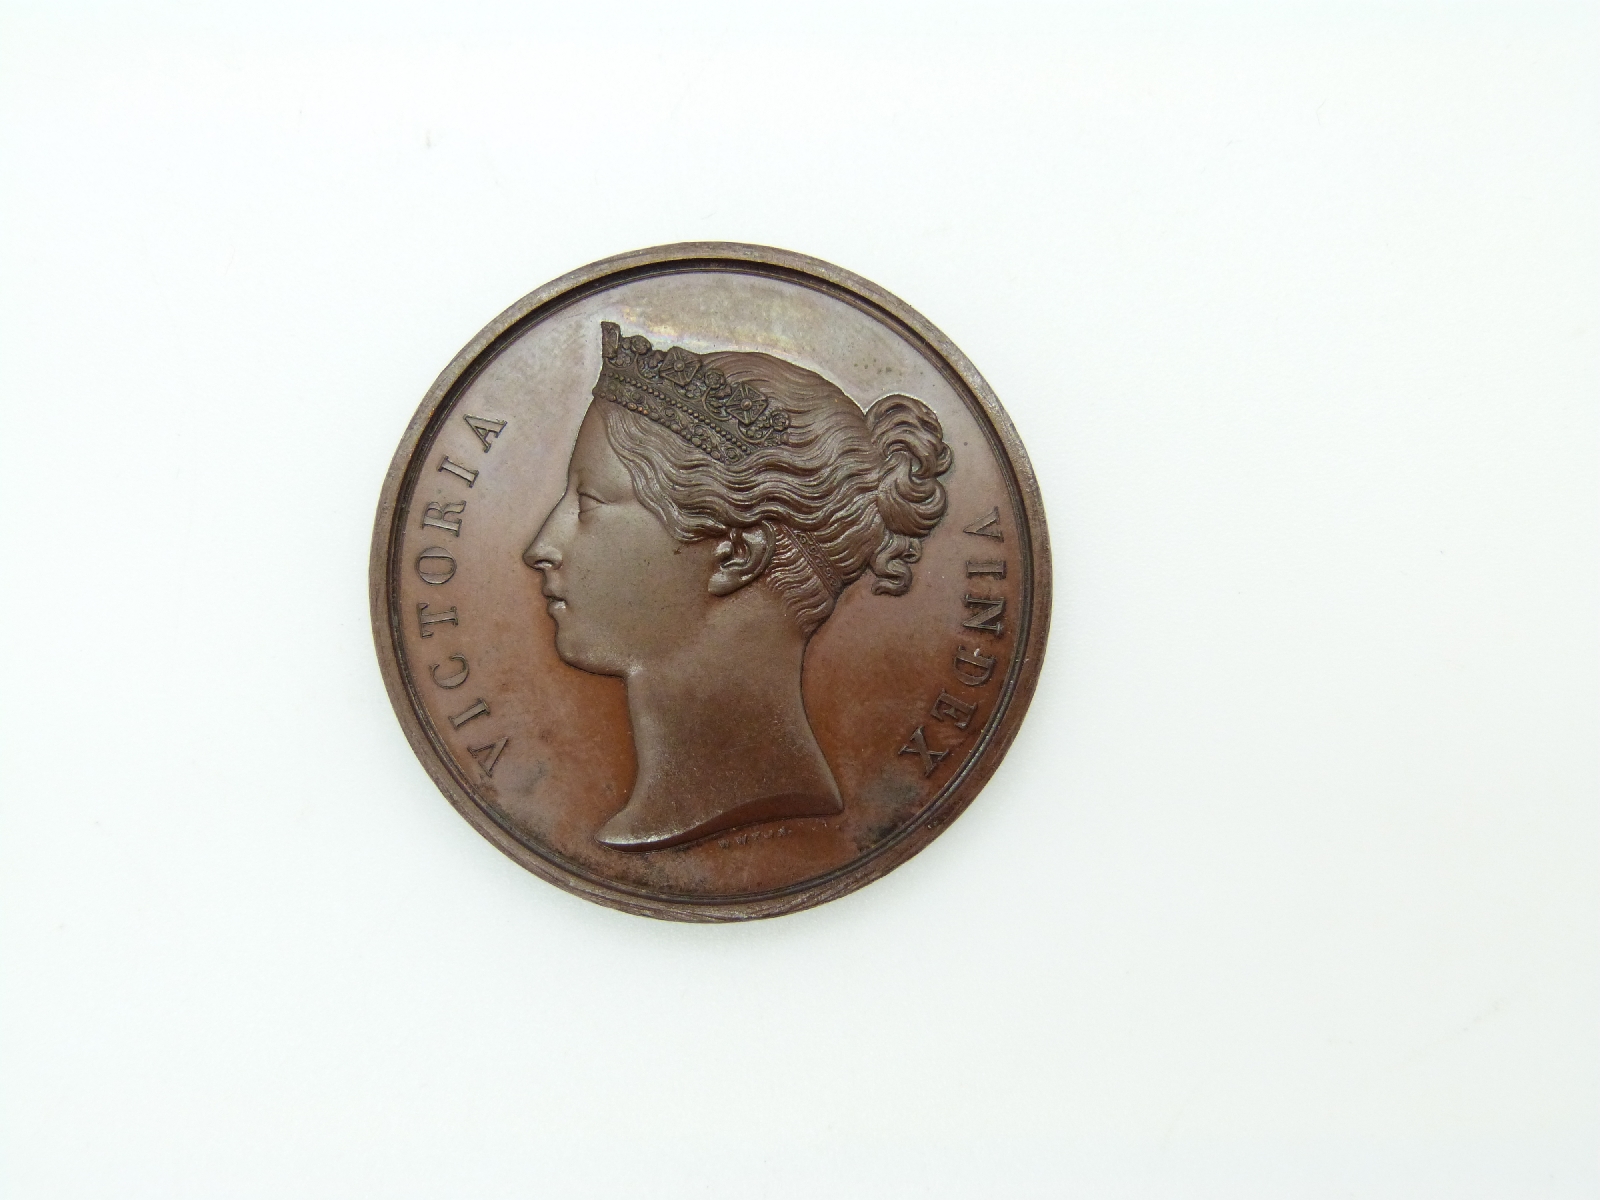 Victorian bronze medal for Candahar, Ghuznee, Cabul 1842, possibly a prototype / specimen, D36.3mm - Image 2 of 2